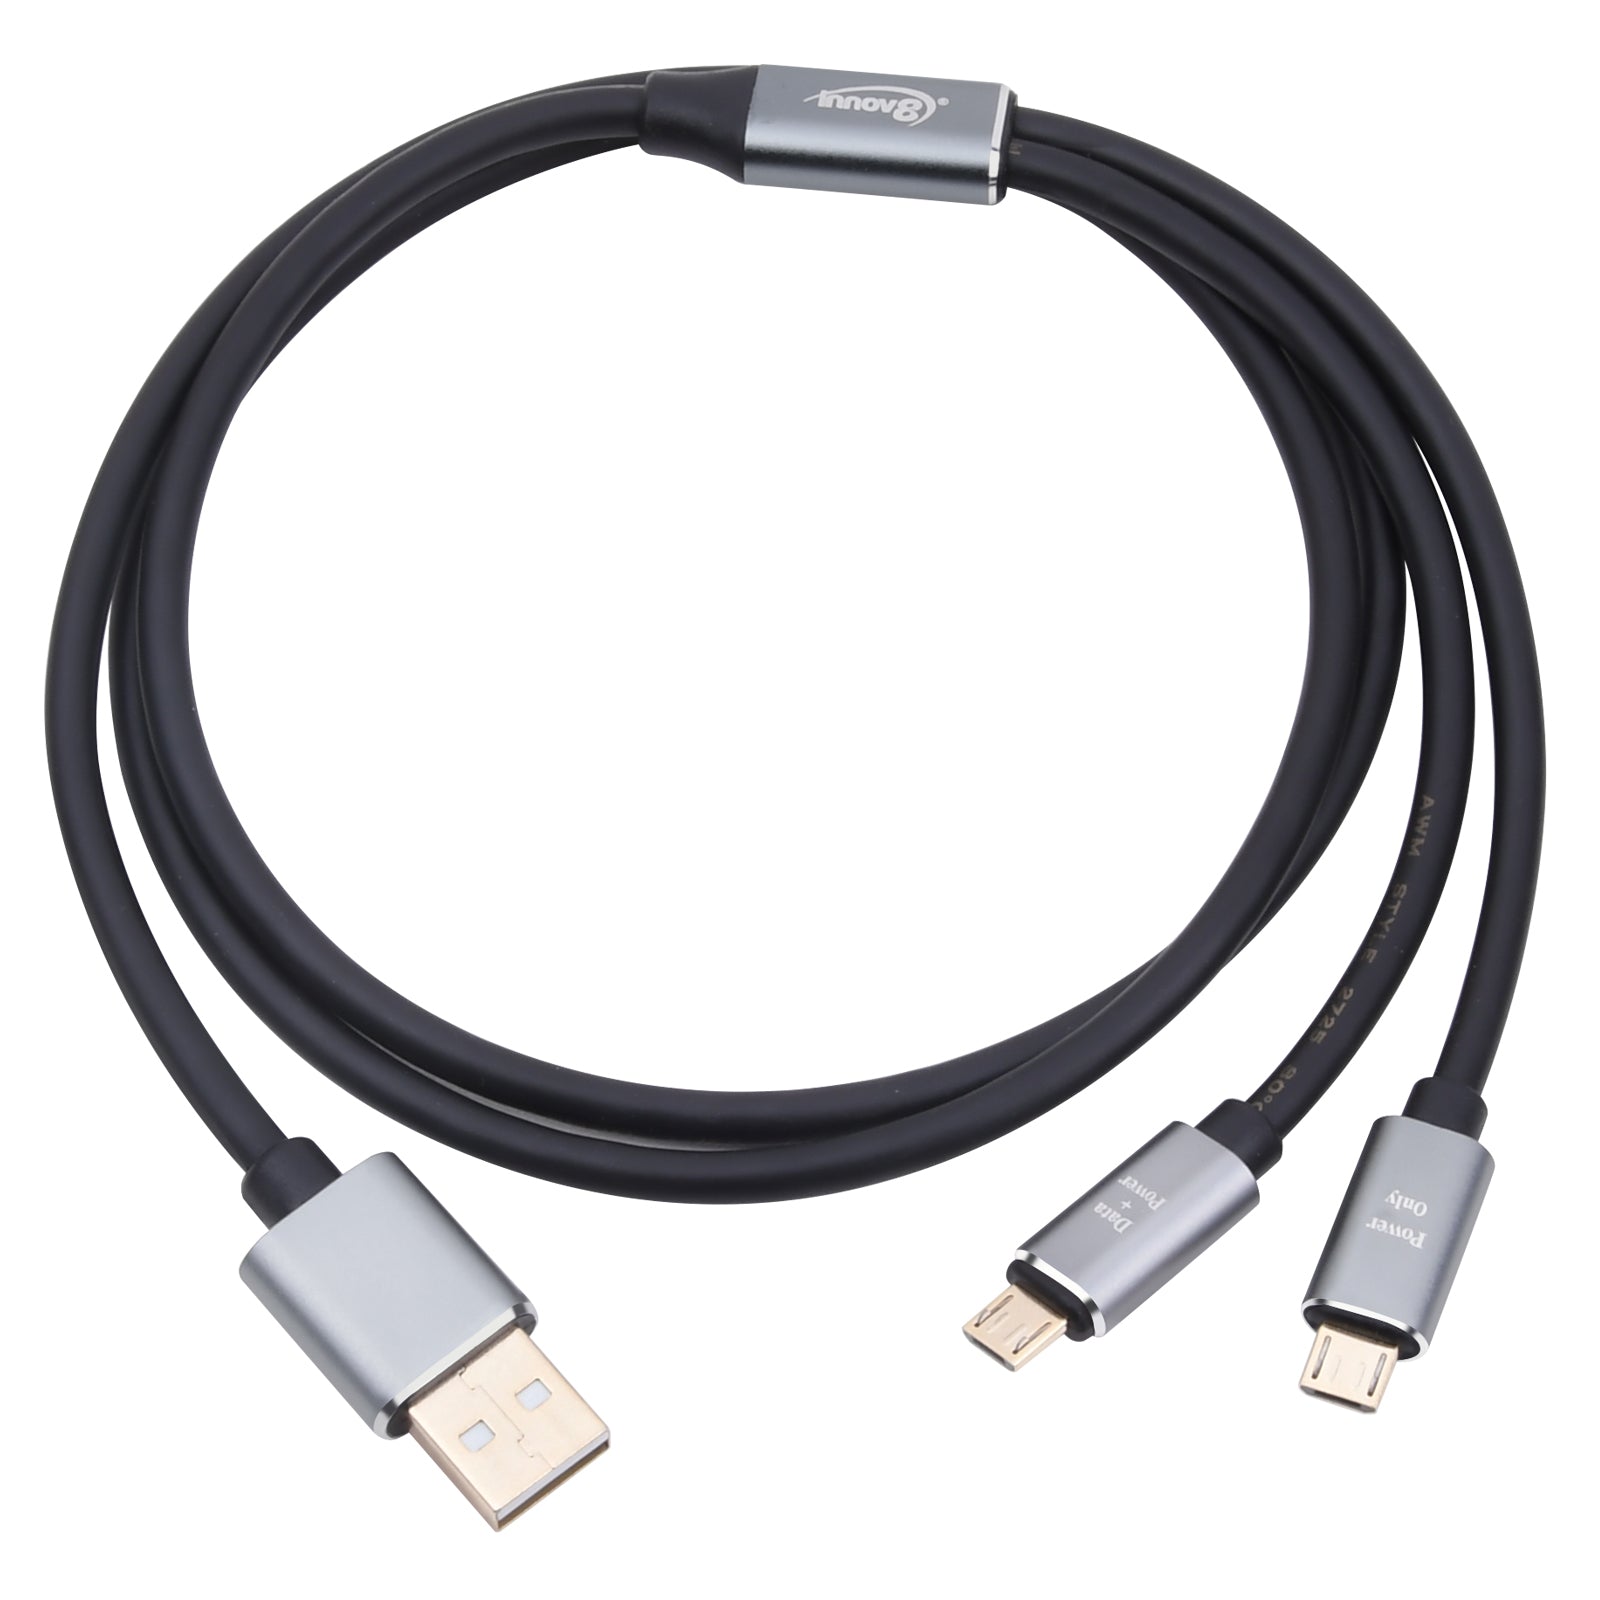 USB 2.0 A Male to Dual Micro USB Male Splitter Cable 1m